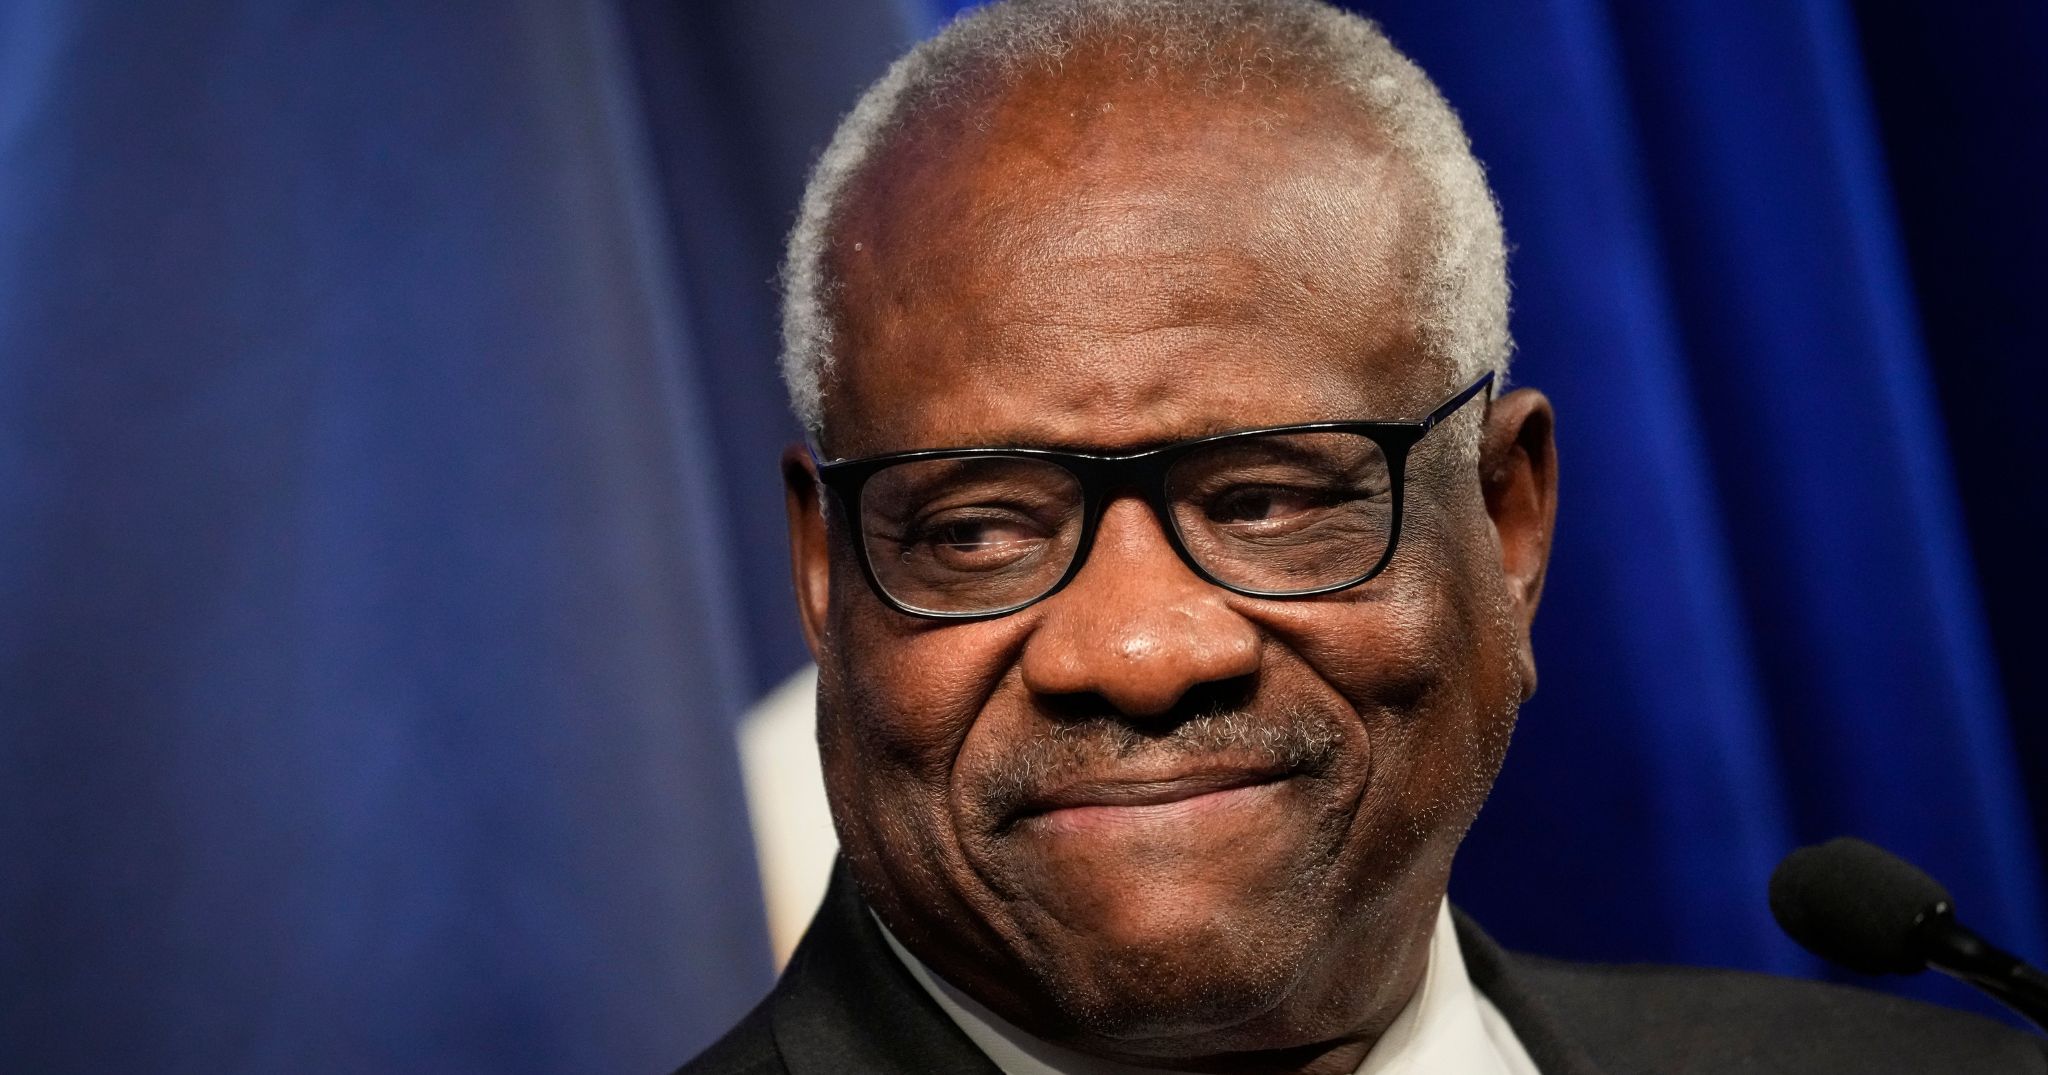 Associate Supreme Court Justice Clarence Thomas speaks at the Heritage Foundation in Washington, D.C., on Oct. 21, 2021.